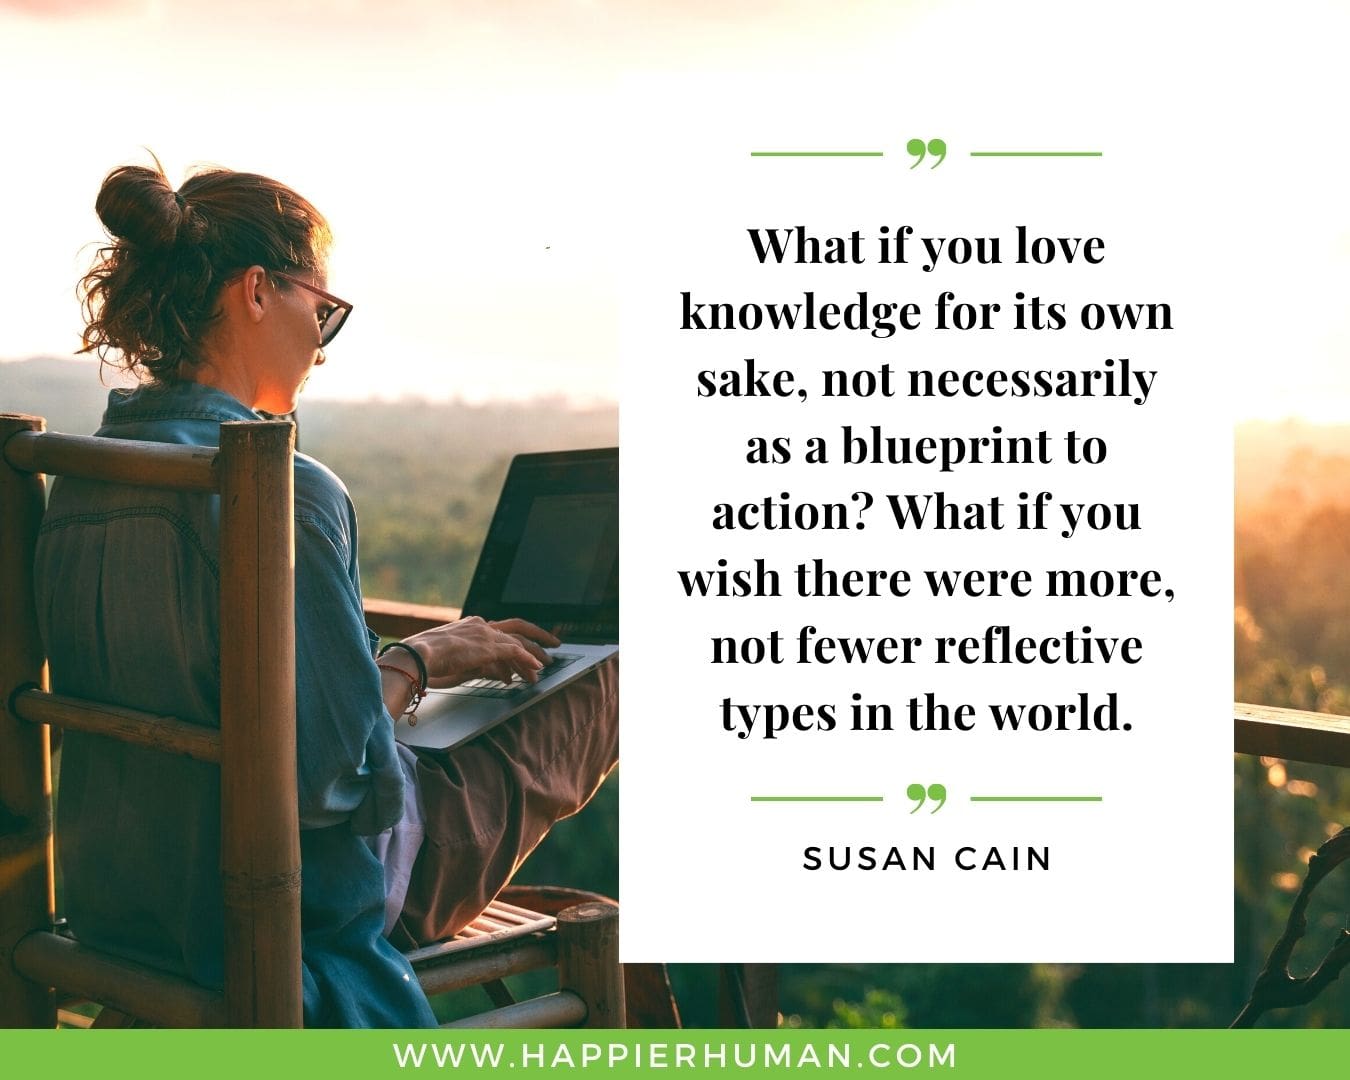 Introvert Quotes - “What if you love knowledge for its own sake, not necessarily as a blueprint to action? What if you wish there were more, not fewer reflective types in the world.” – Susan Cain